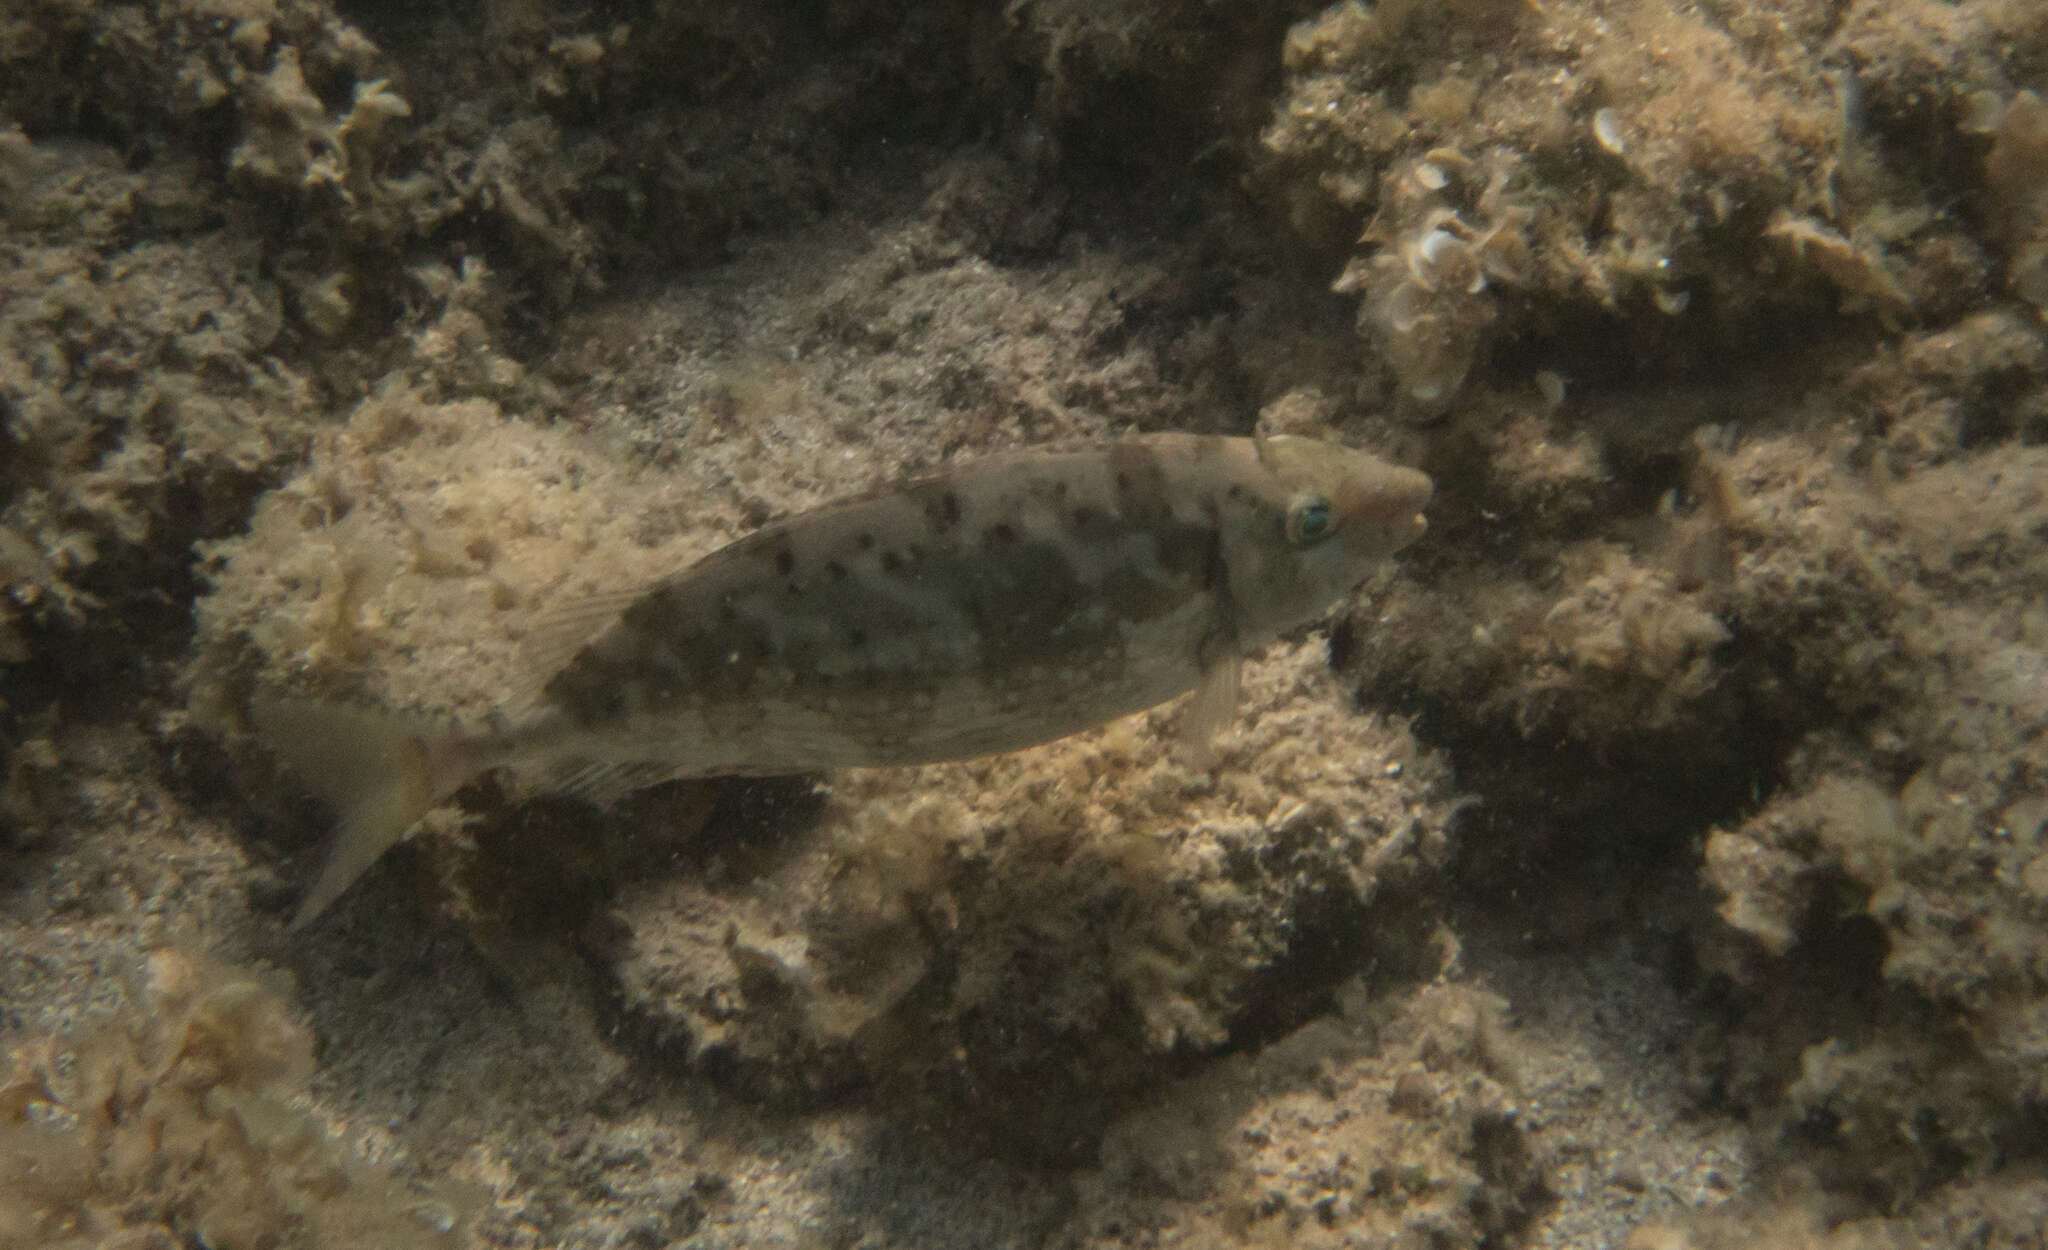 Image of Marbled Spinefoot